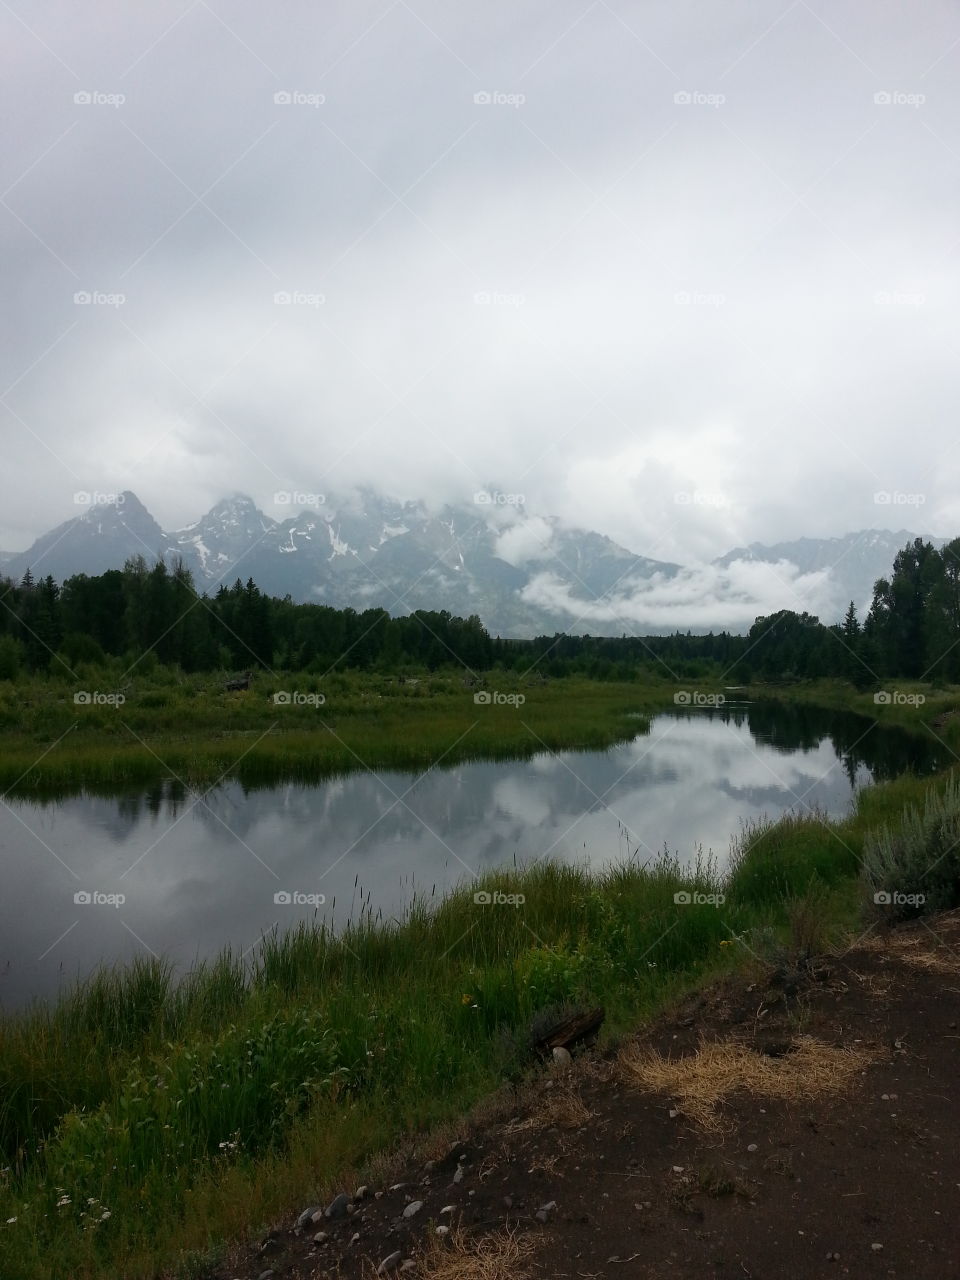 Reflection of Great Tetons. Great Teton mountains reflected in the Snake River